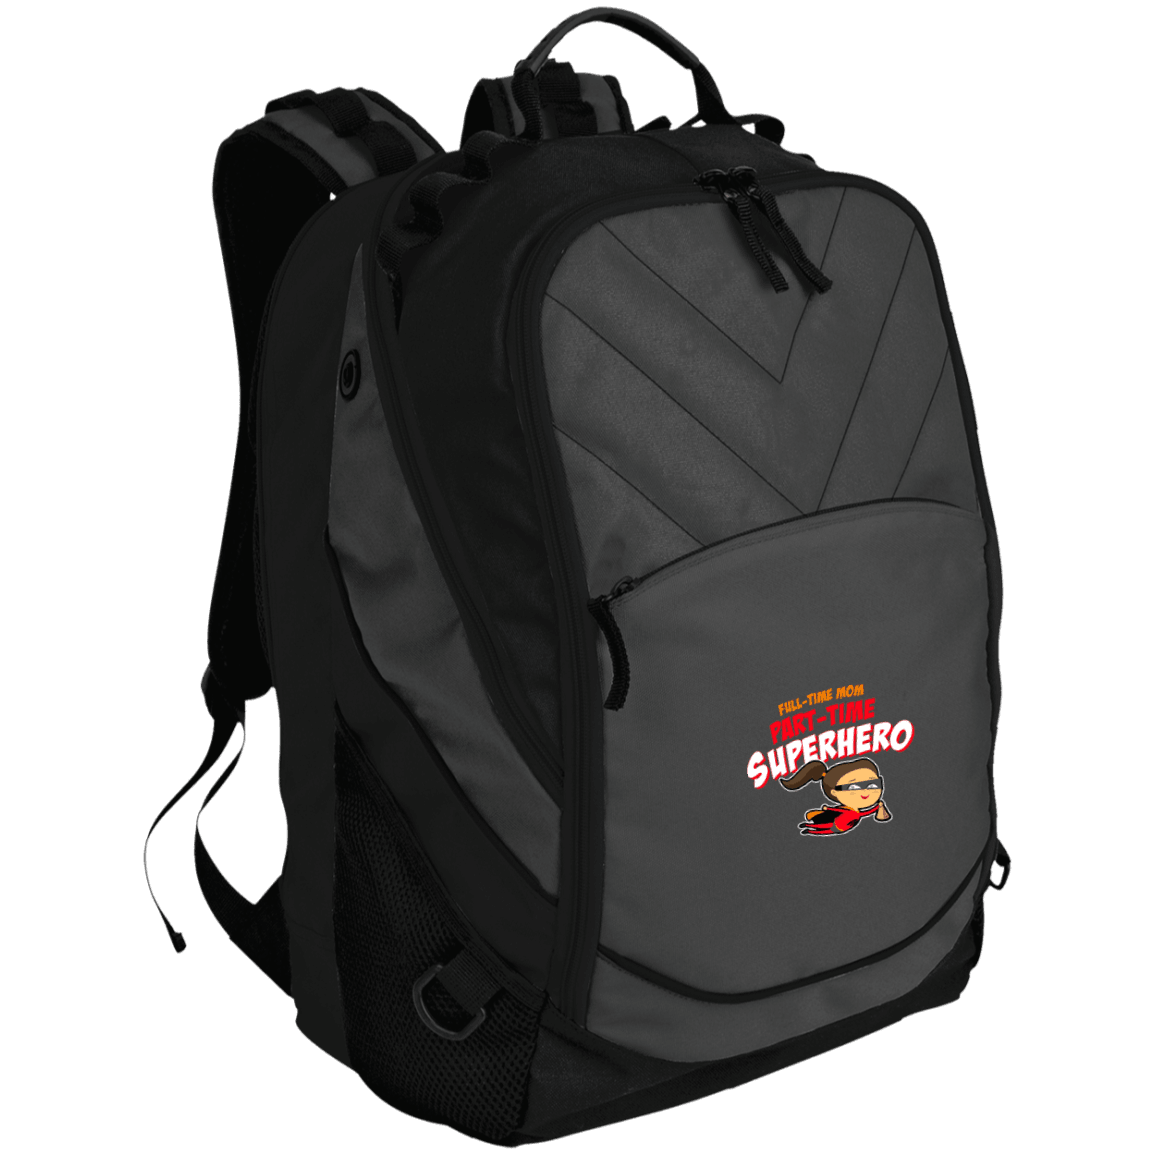 Designs by MyUtopia Shout Out:Full-time Mom Part-Time Superhero Laptop Computer Backpack,Dark Charcoal/Black / One Size,Backpacks